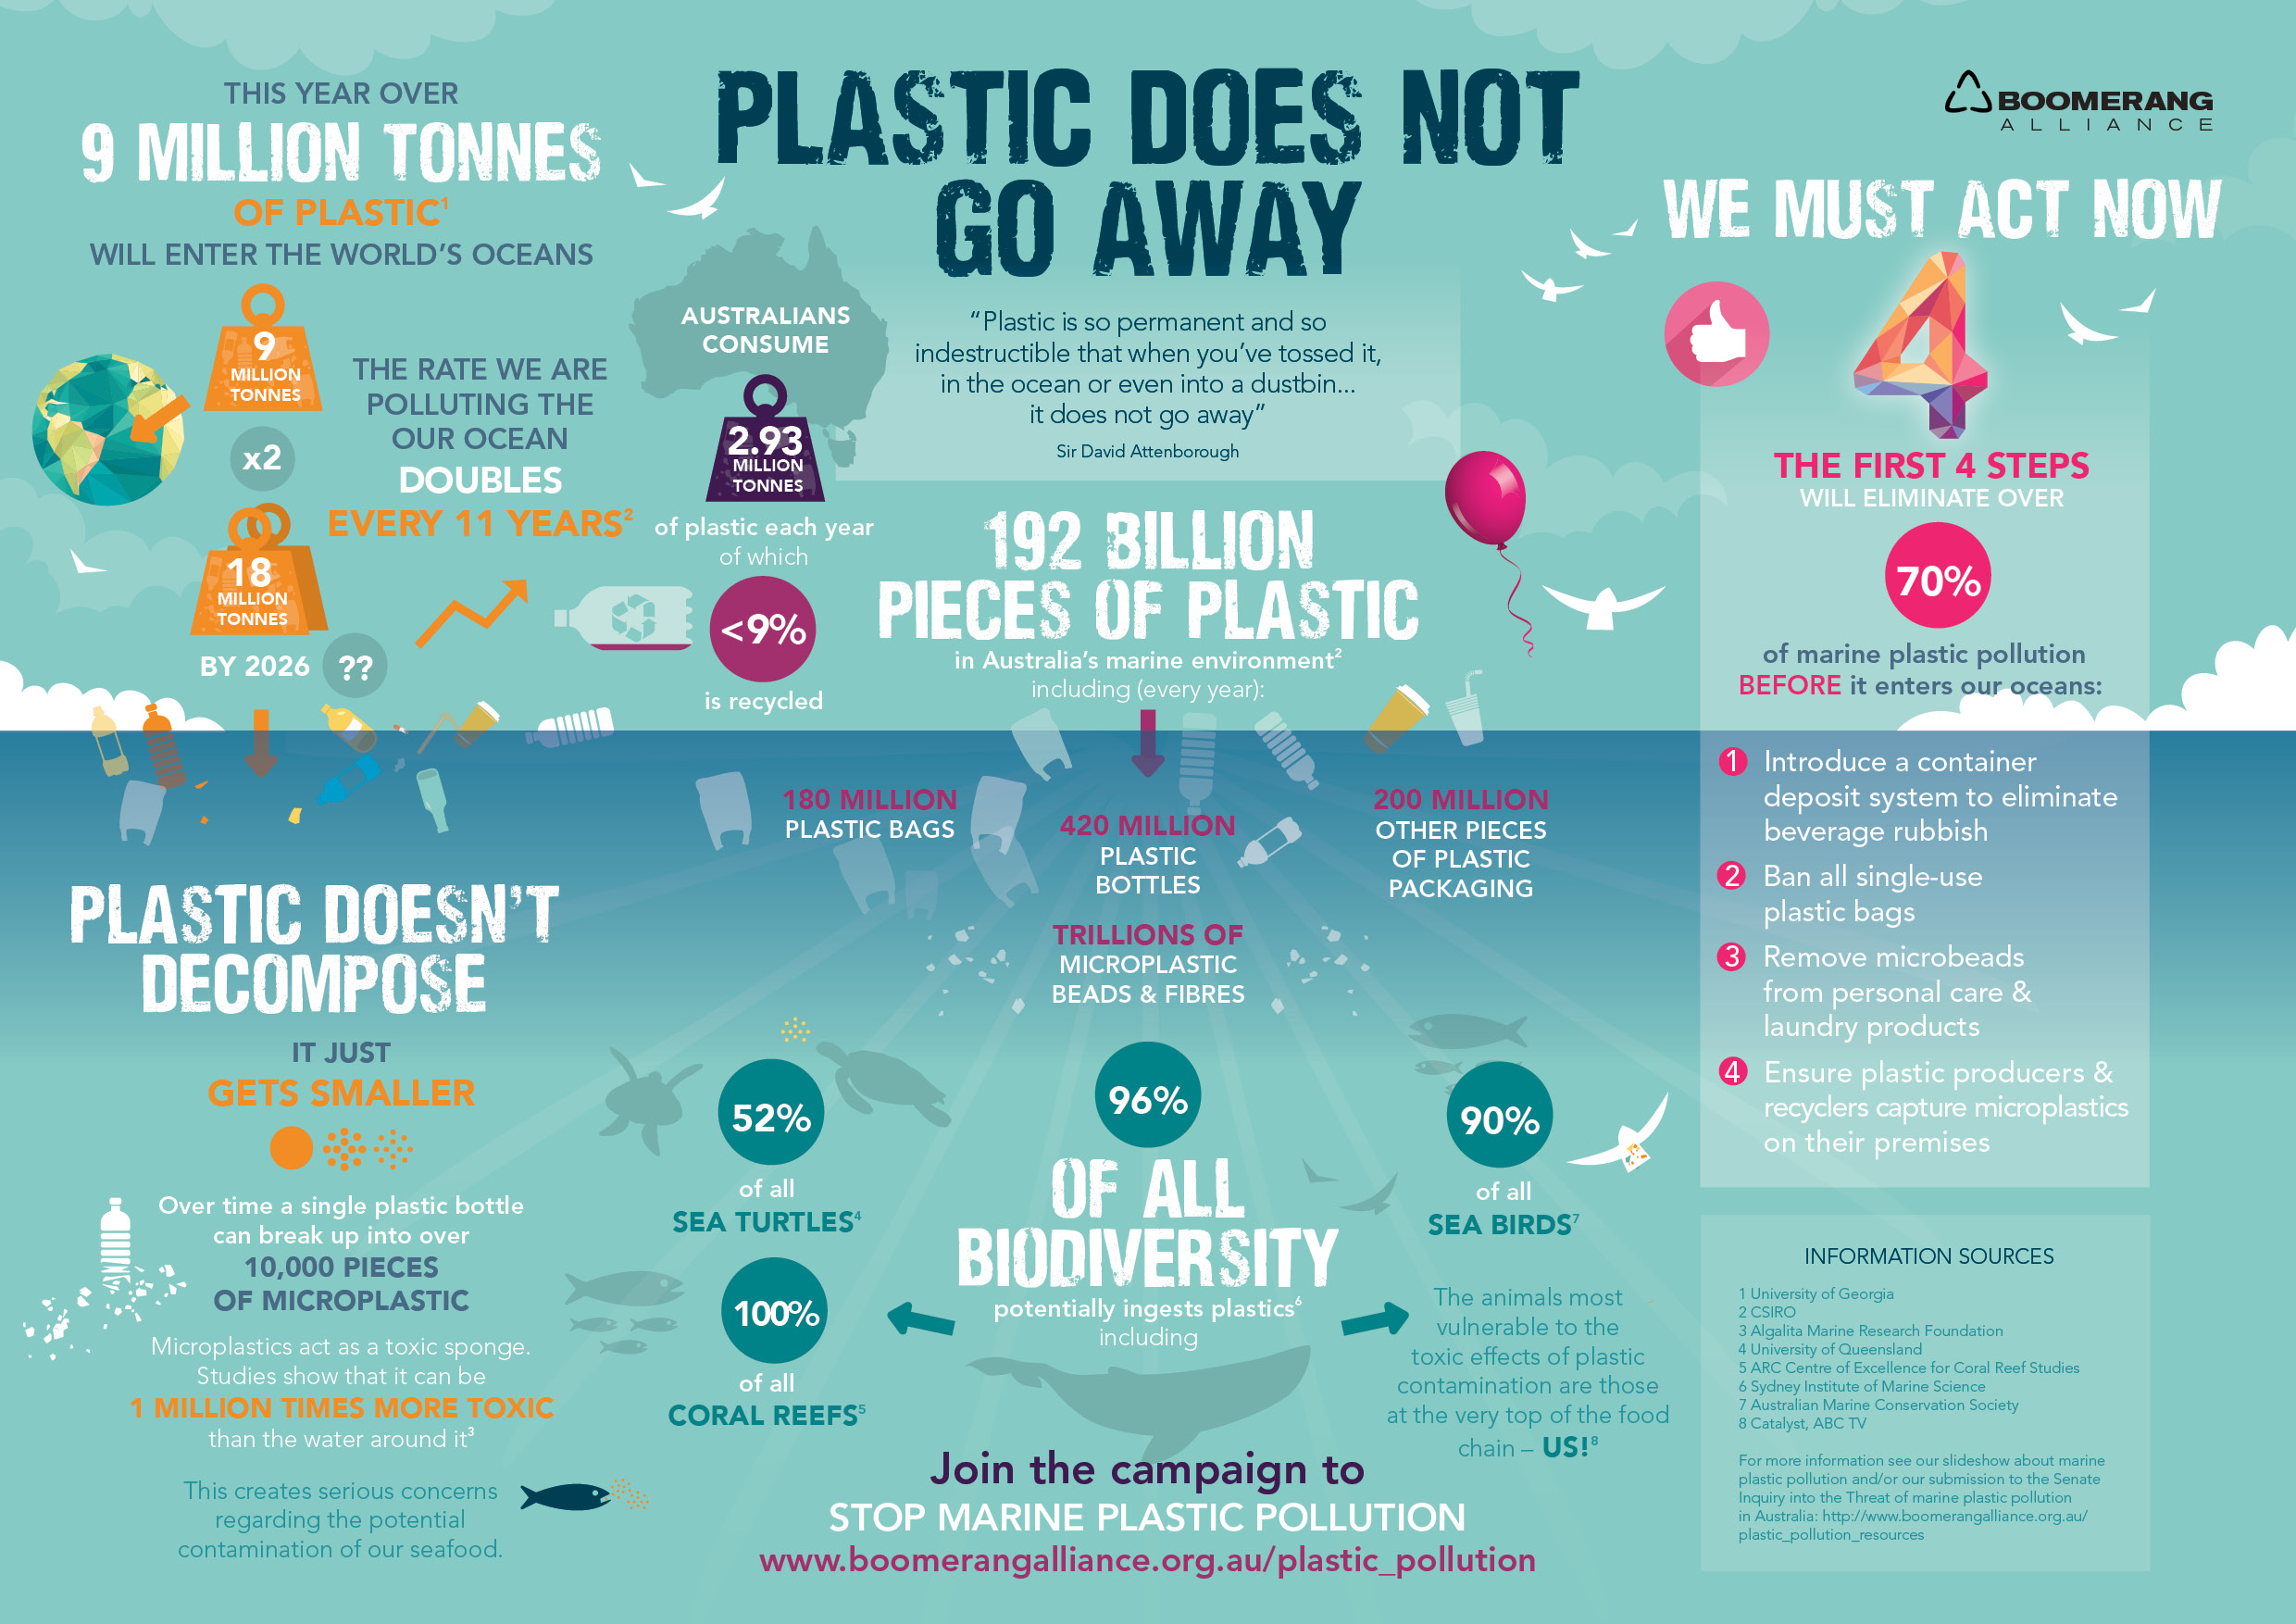 research paper on single use plastic